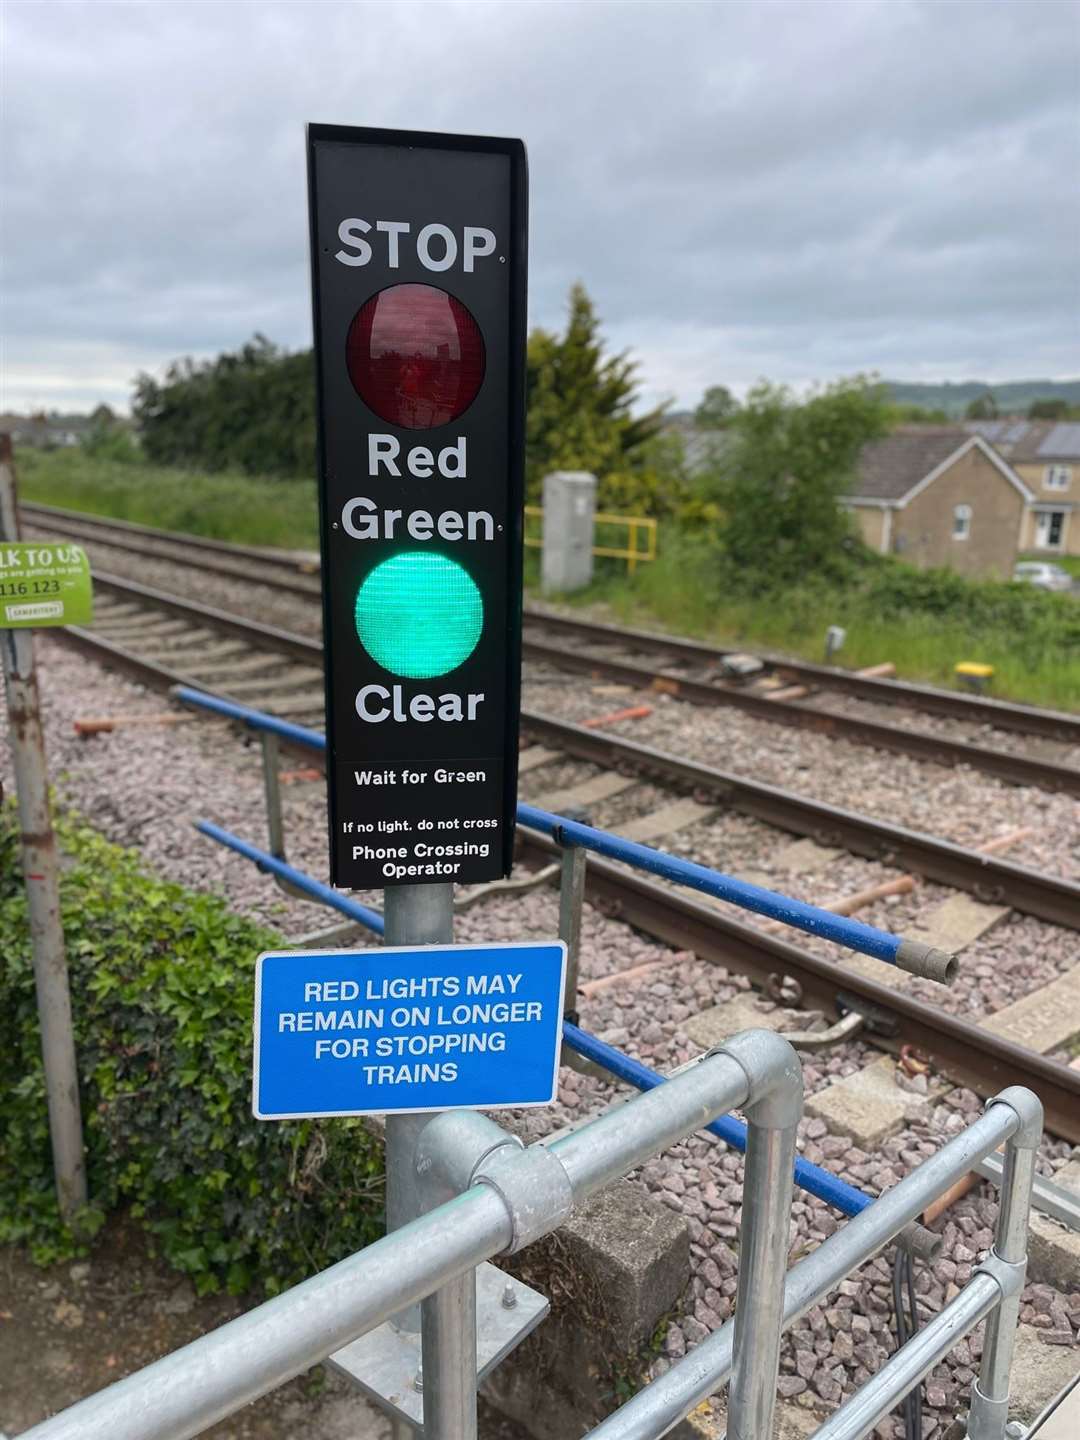 A traffic light has been installed as part of the upgrade to a level crossing in Gloucestershire (Network Rail/PA)